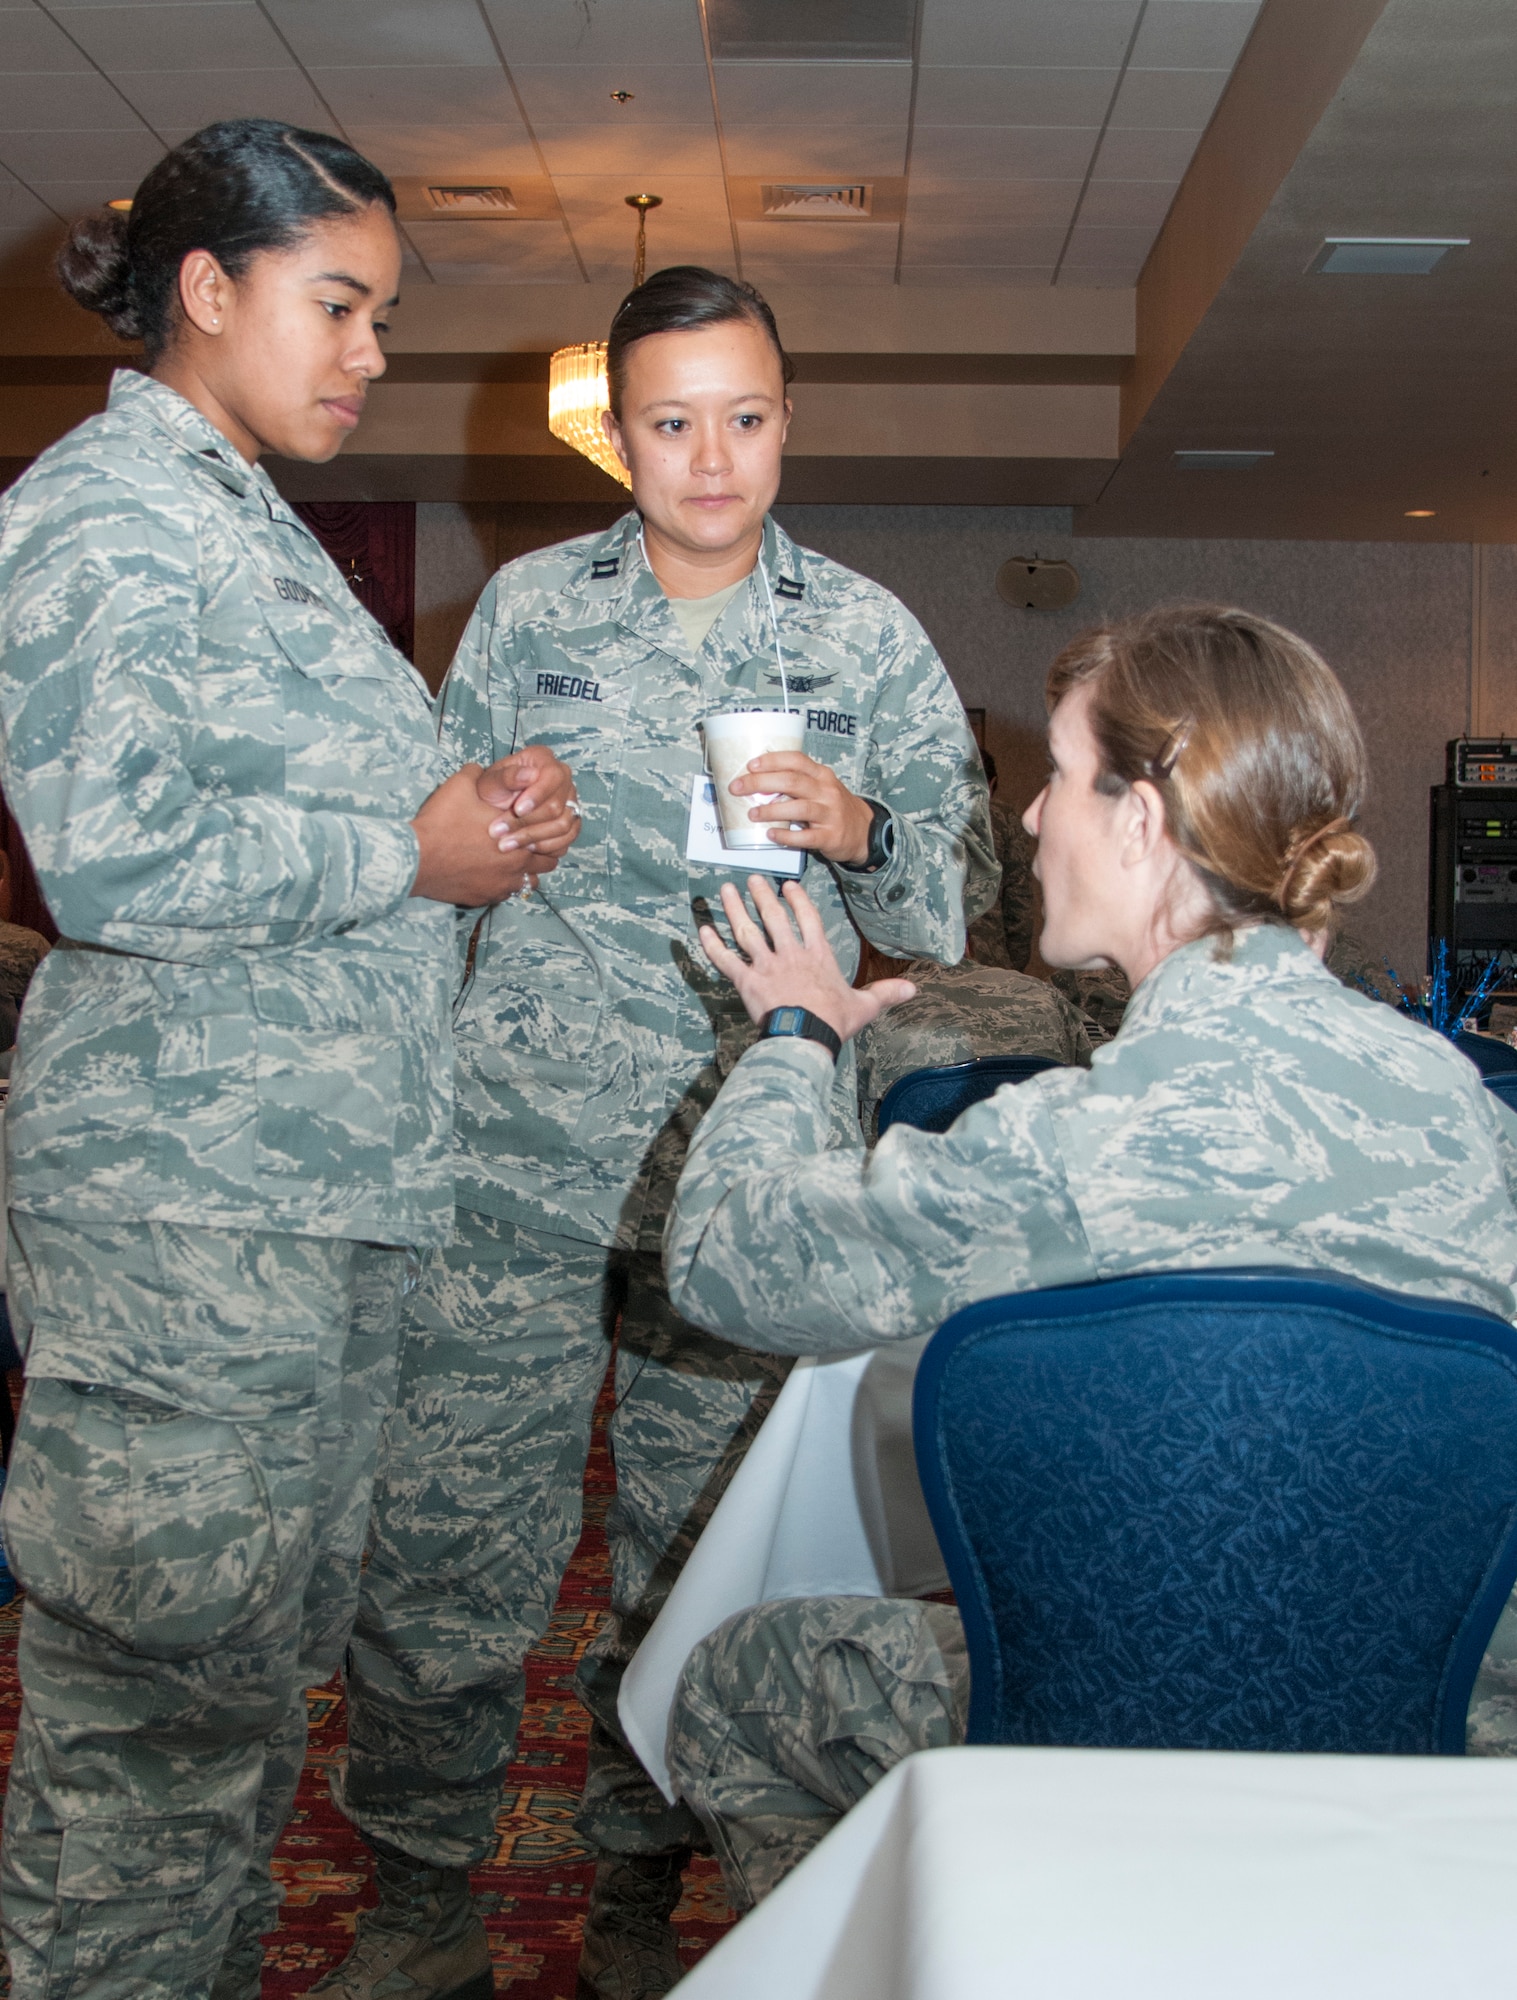 Twentieth Air Force Women’s Leadership Symposium attendees converse during a break in scheduled activities Sept. 15, 2015, in the F.E. Warren Air Force Base, Wyo., Trail’s End Event Center. The event connected women throughout the 20th AF for mentorship and professional development. (U.S. Air Force photo by Senior Airman Jason Wiese)